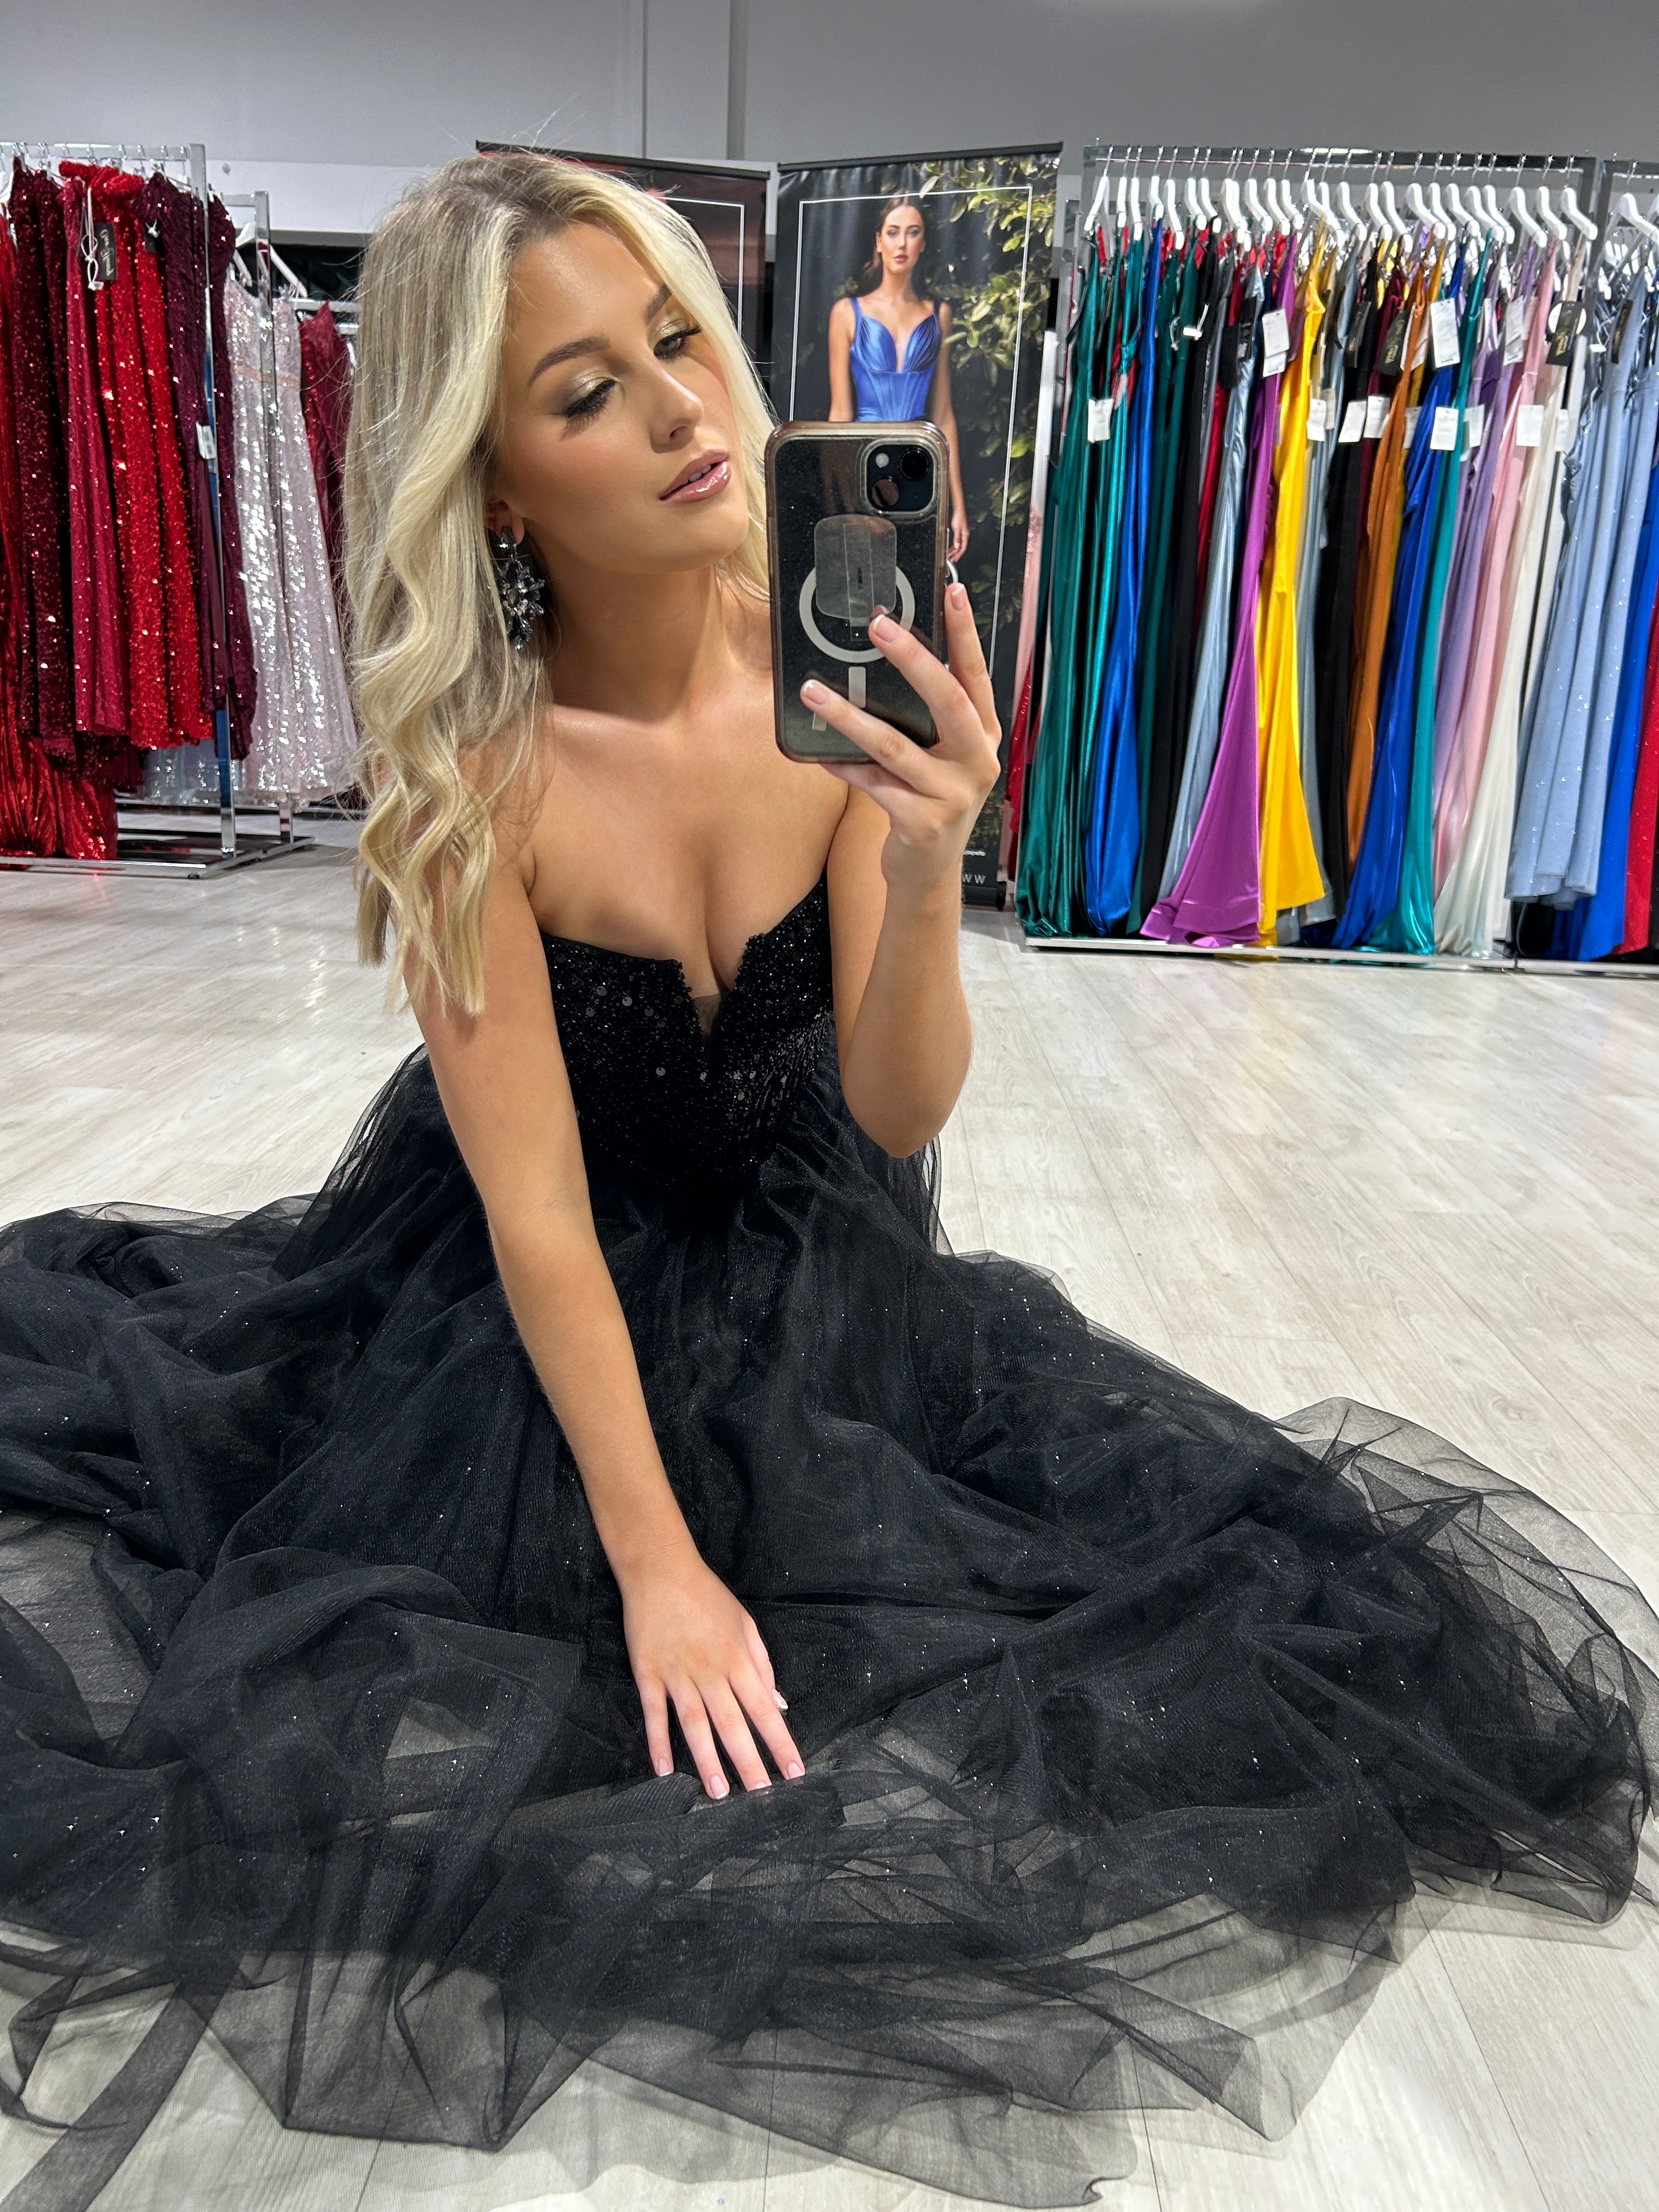 Honey Couture LEIA Black Strapless Bustier Tulle A-Line Formal Dress